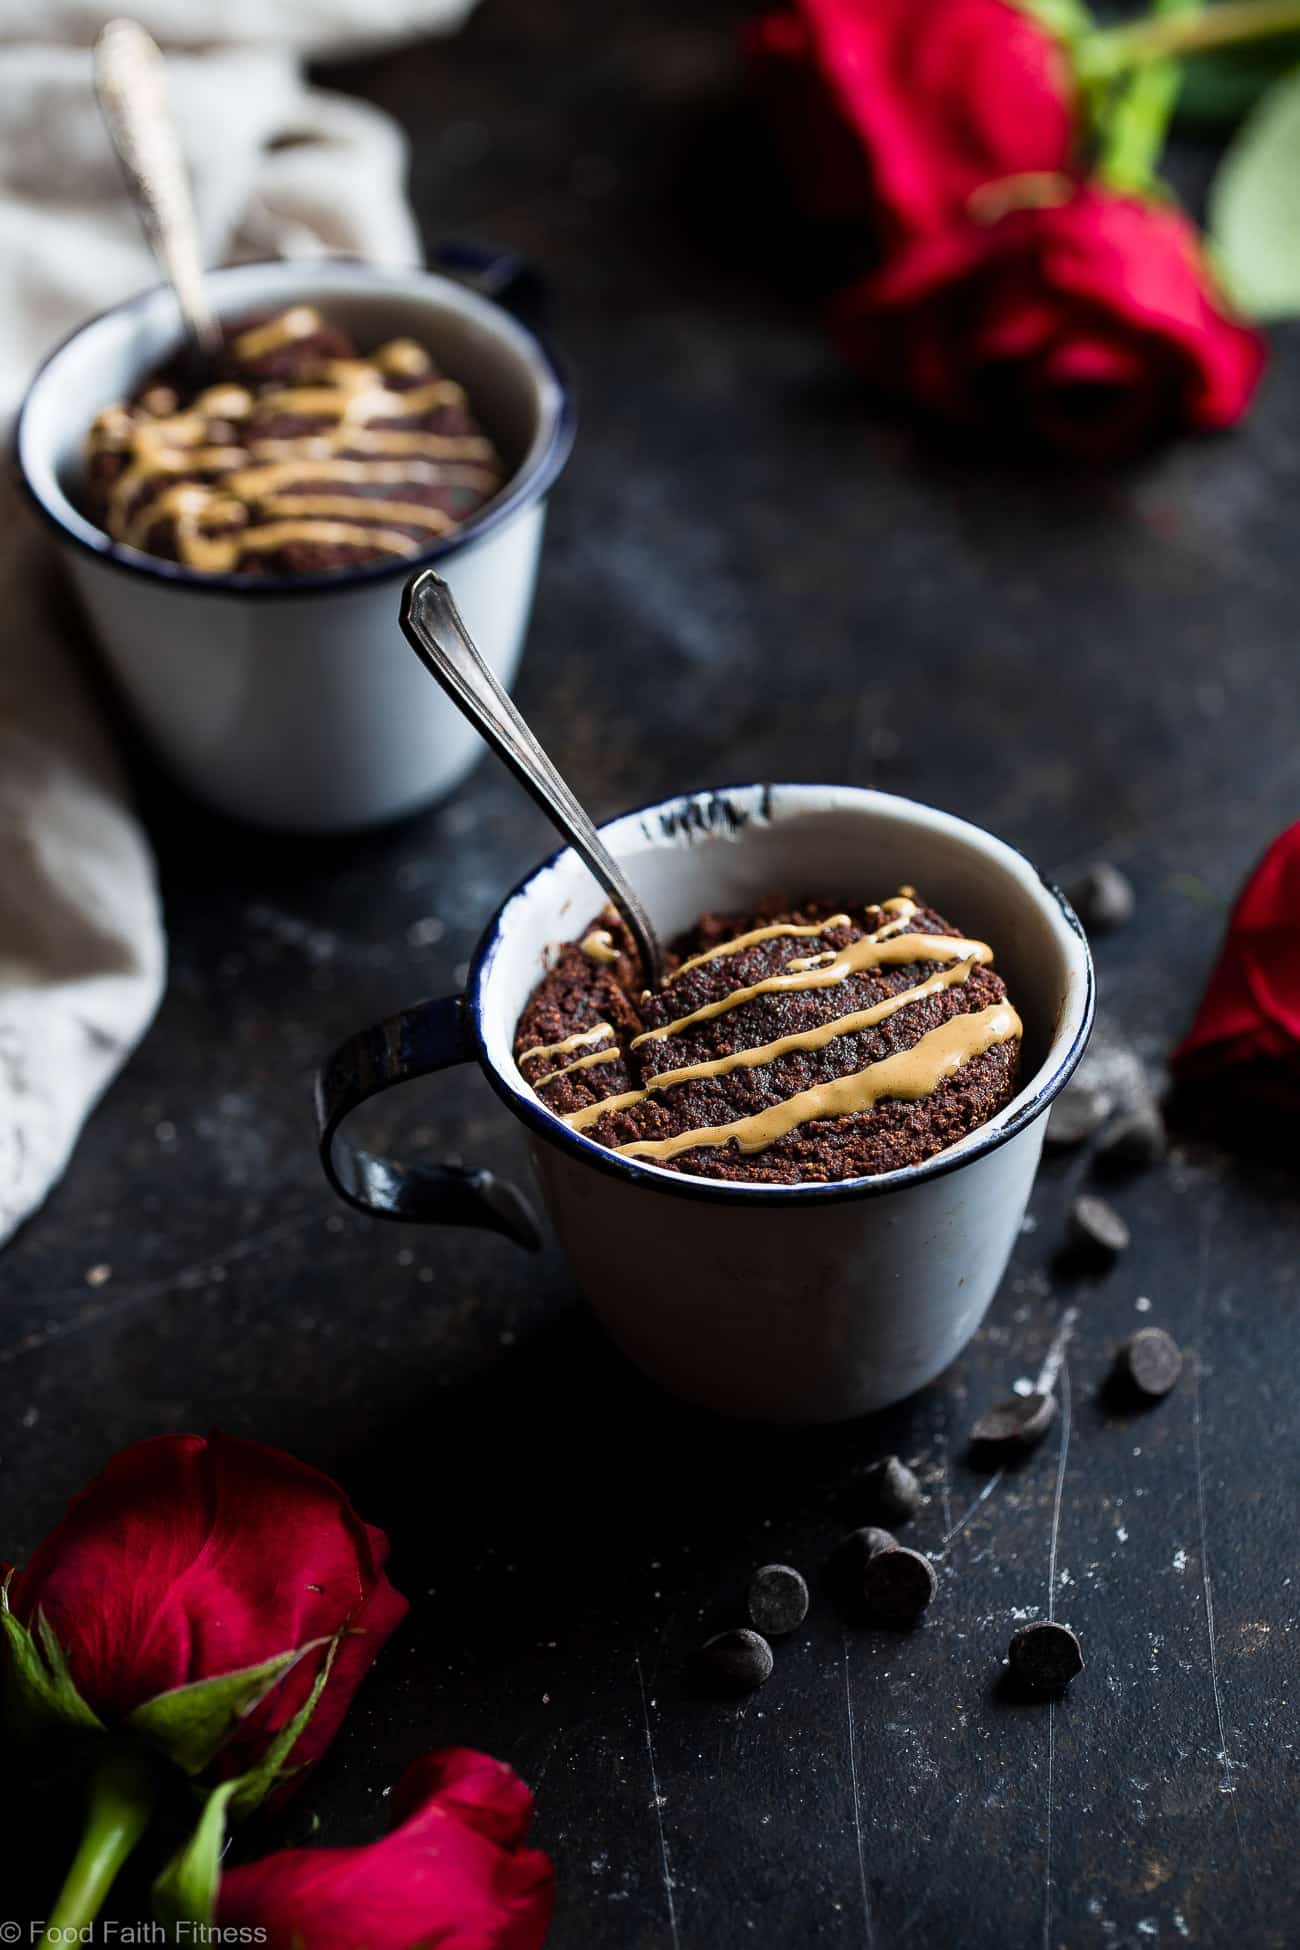 Coconut Flour Chocolate Paleo Mug Cake - A gluten/grain/dairy/sugar free treat that is vegan friendly, ready in 10 minutes and better for you! A healthy dessert at its best! | #Foodfaithfitness | #paleo #vegan #glutenfree #mugcake #chocolate